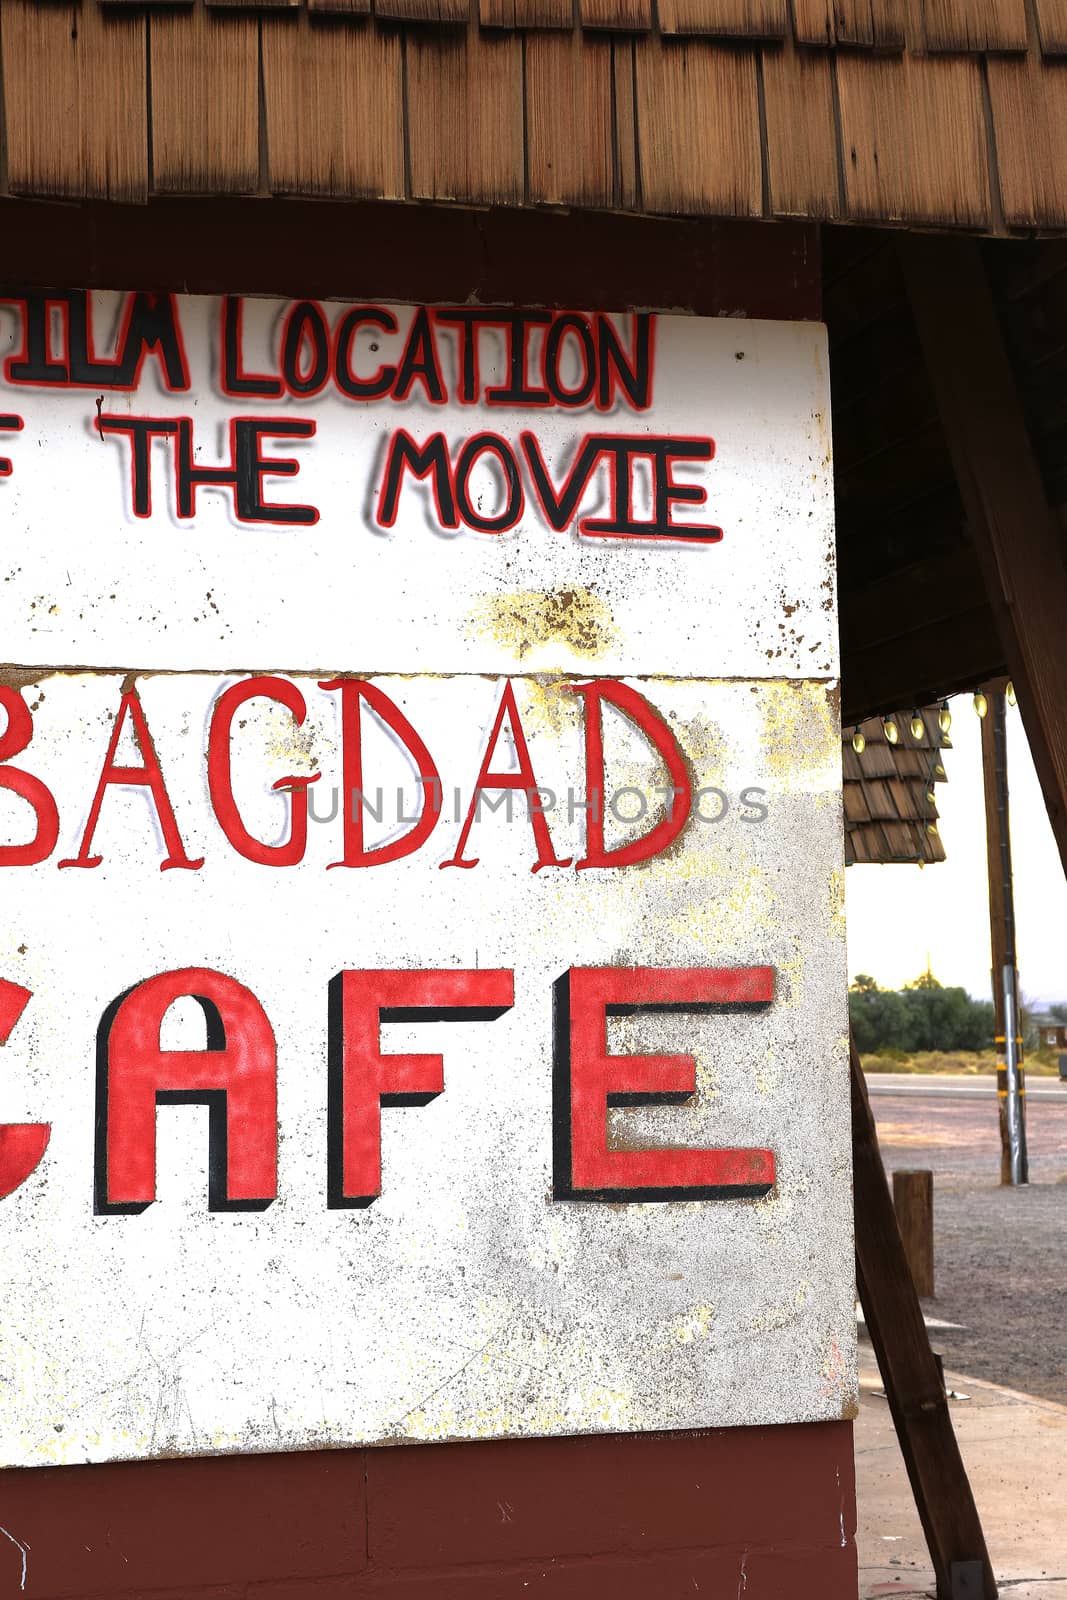 The Bagdad Cafe from the 1960s along Route 66 in the Mojave Desert by USA-TARO